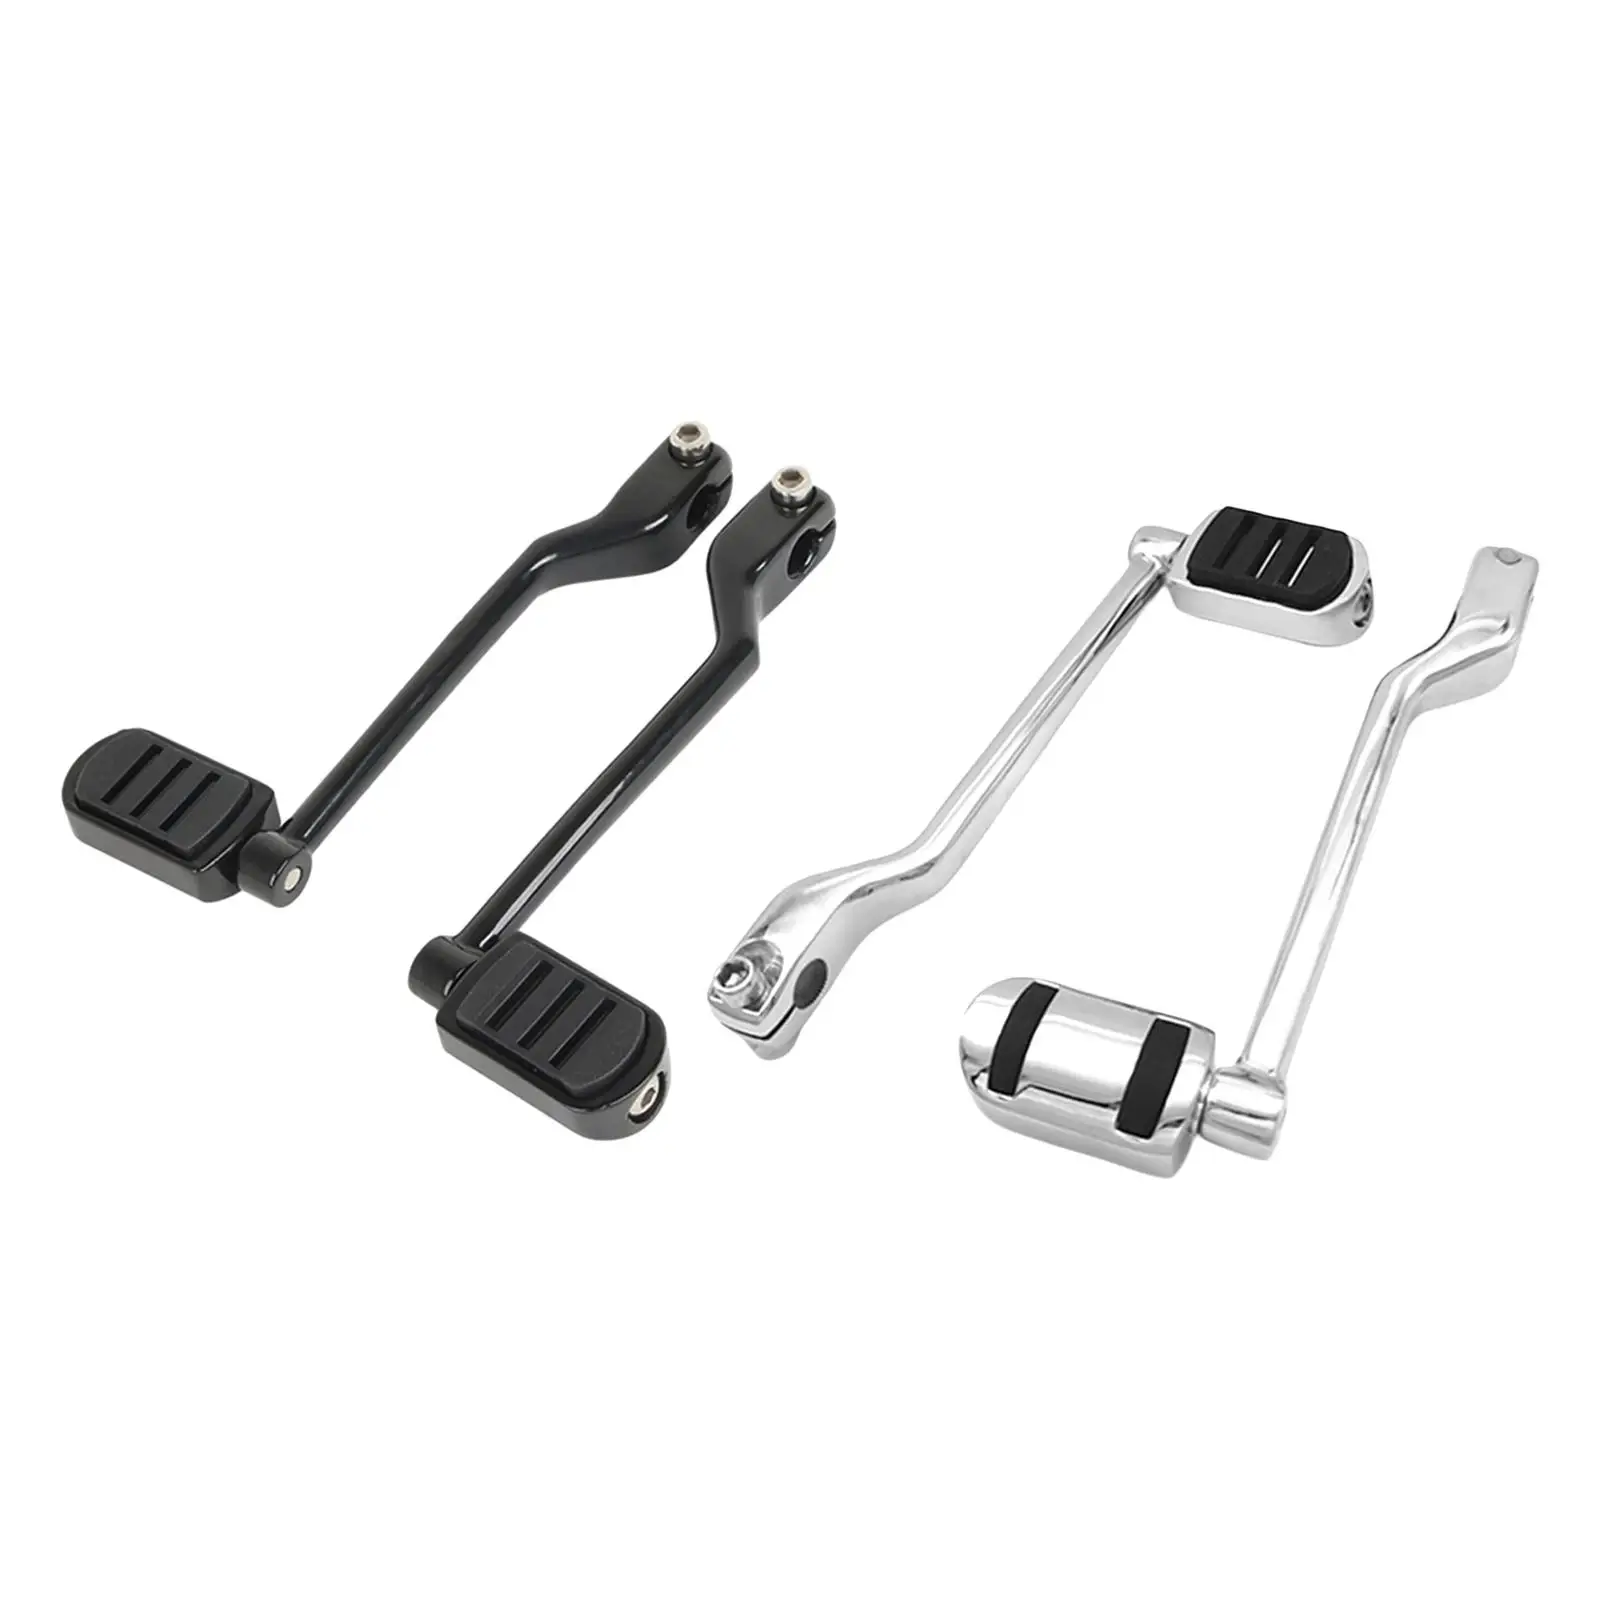 2Pcs Shifter Levers Aluminum Alloy Accessory for Harley Road King 97-22